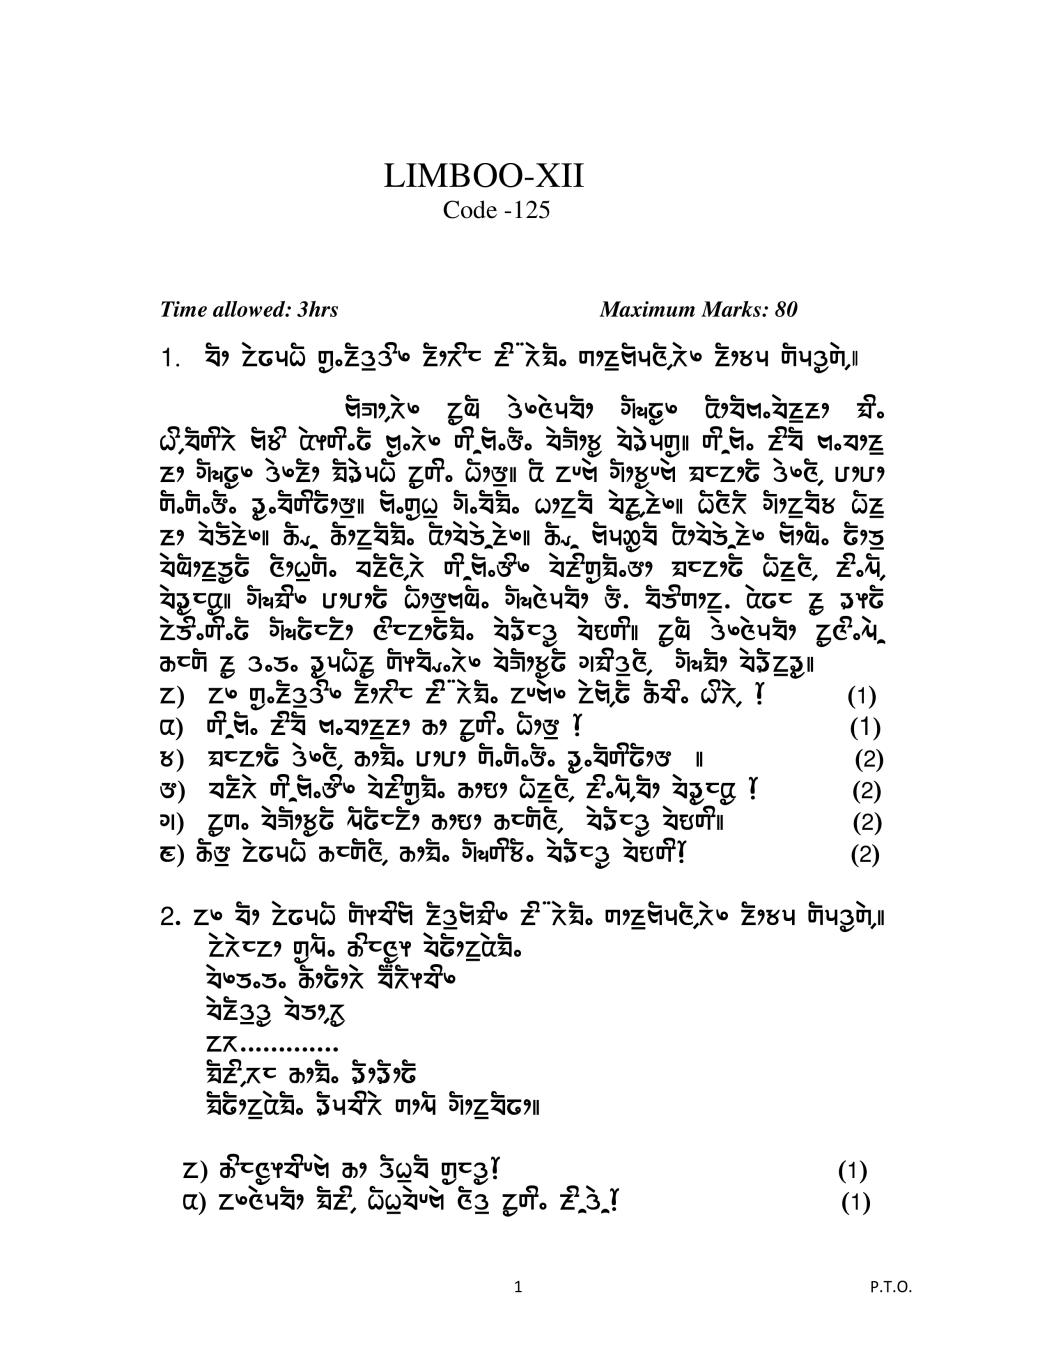 CBSE Class 12 Sample Paper 2020 for Limboo - Page 1